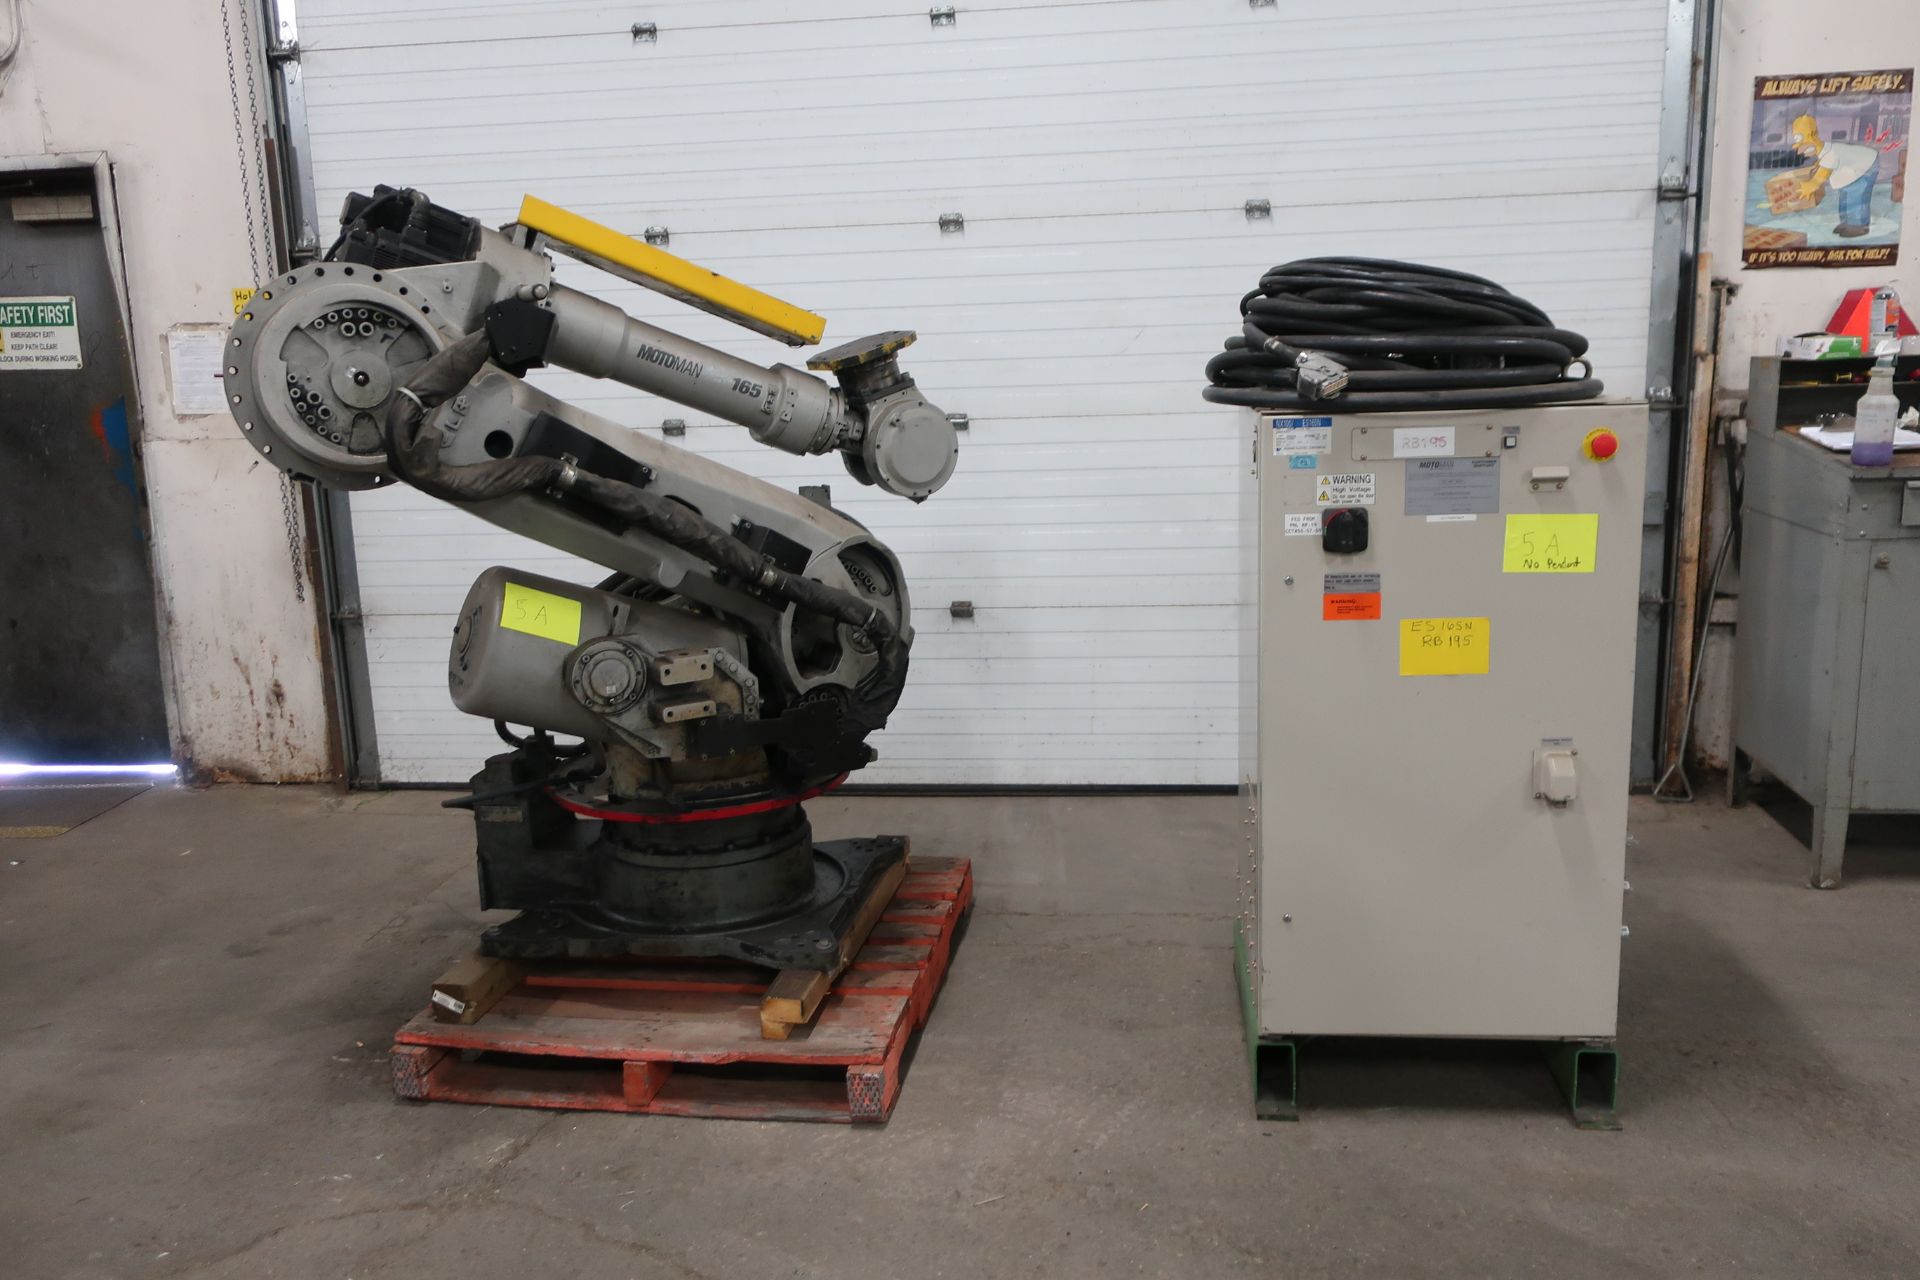 2008 Motoman ES165N Robot 165kg Capacity with Controller COMPLETE with Teach Pendant, Cables, LOW